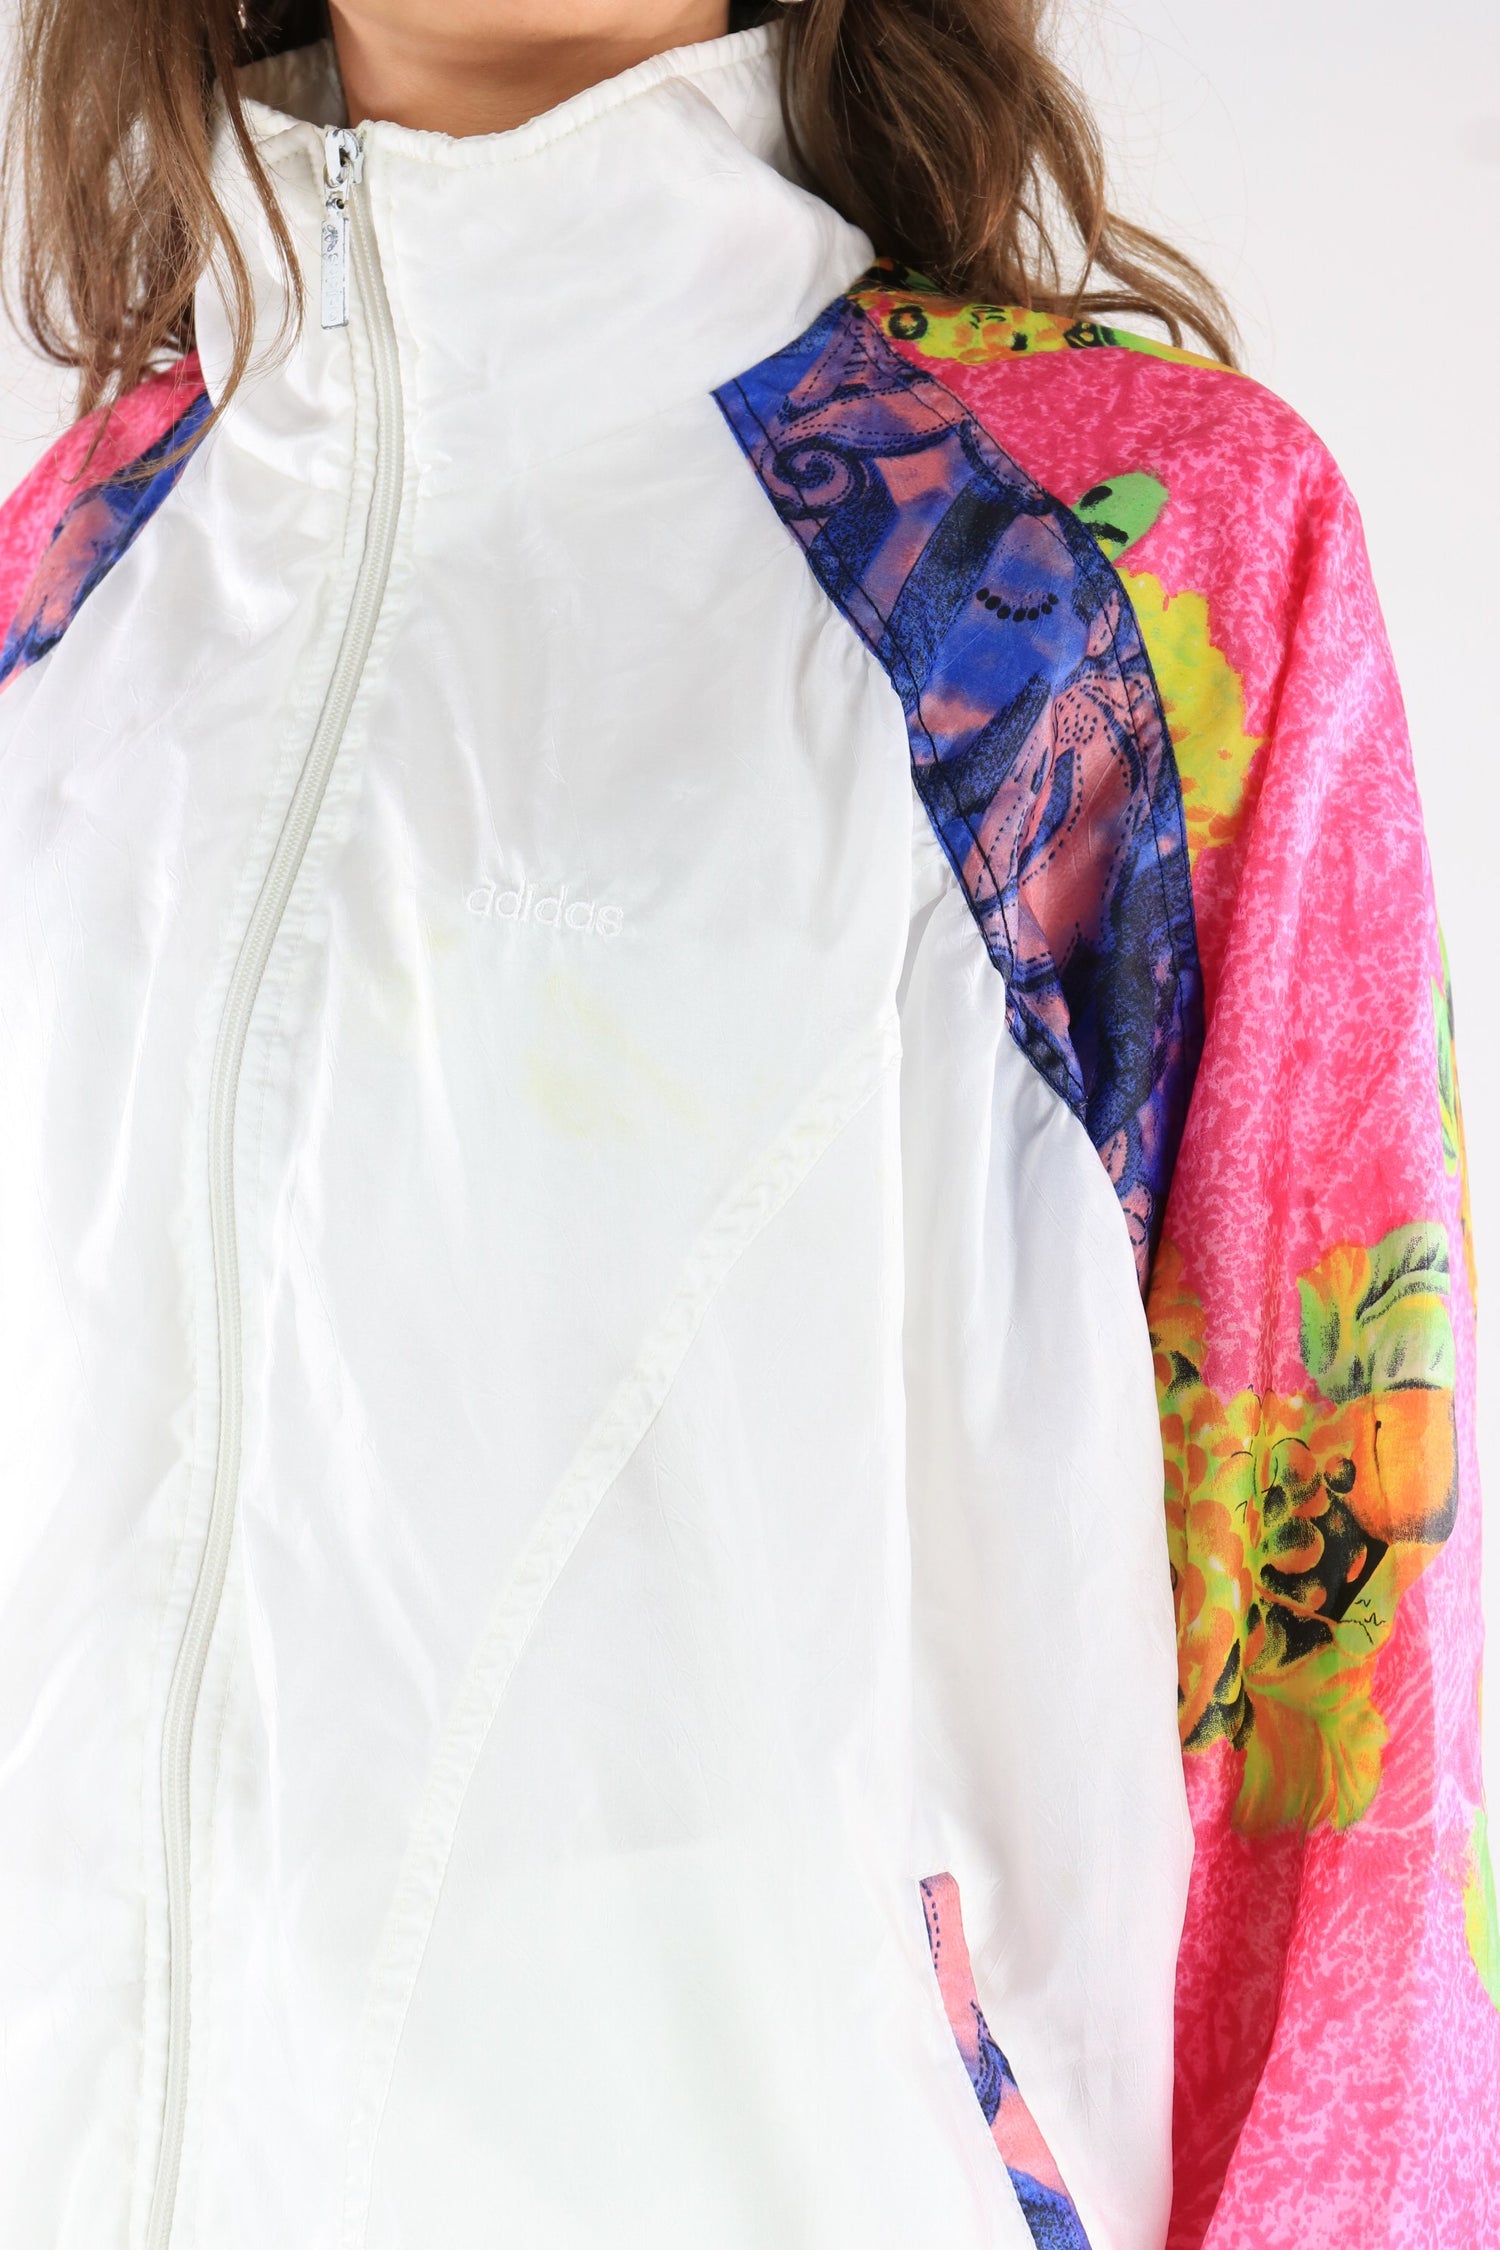 Adidas Shell Suit Jacket White/Pink XL